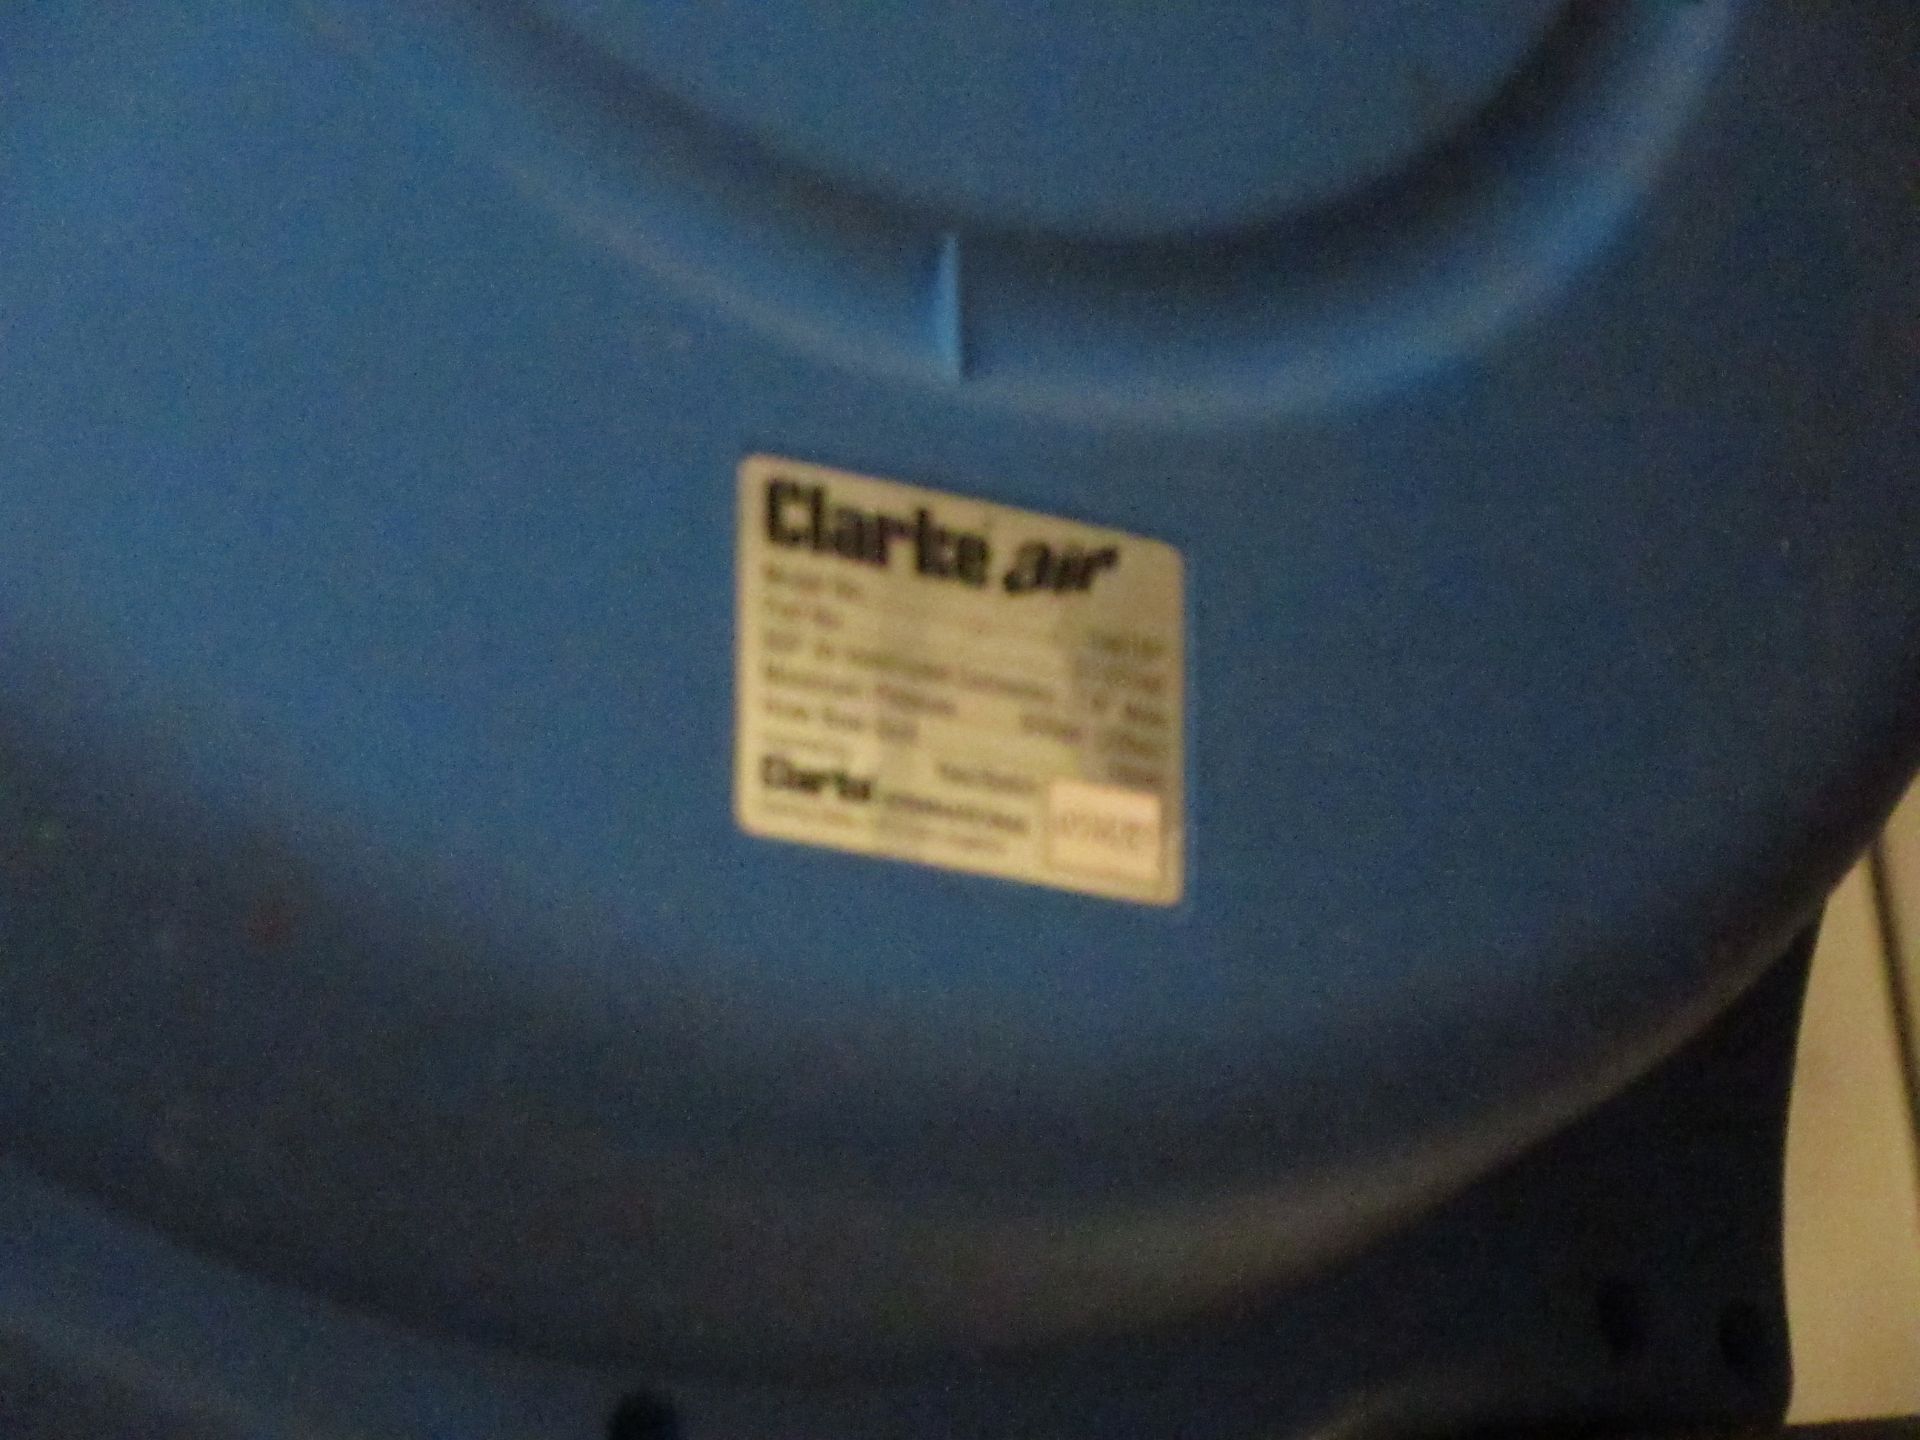 Clarke Air wall mounted retractable reeeled air line, model CAR15P - Image 2 of 3